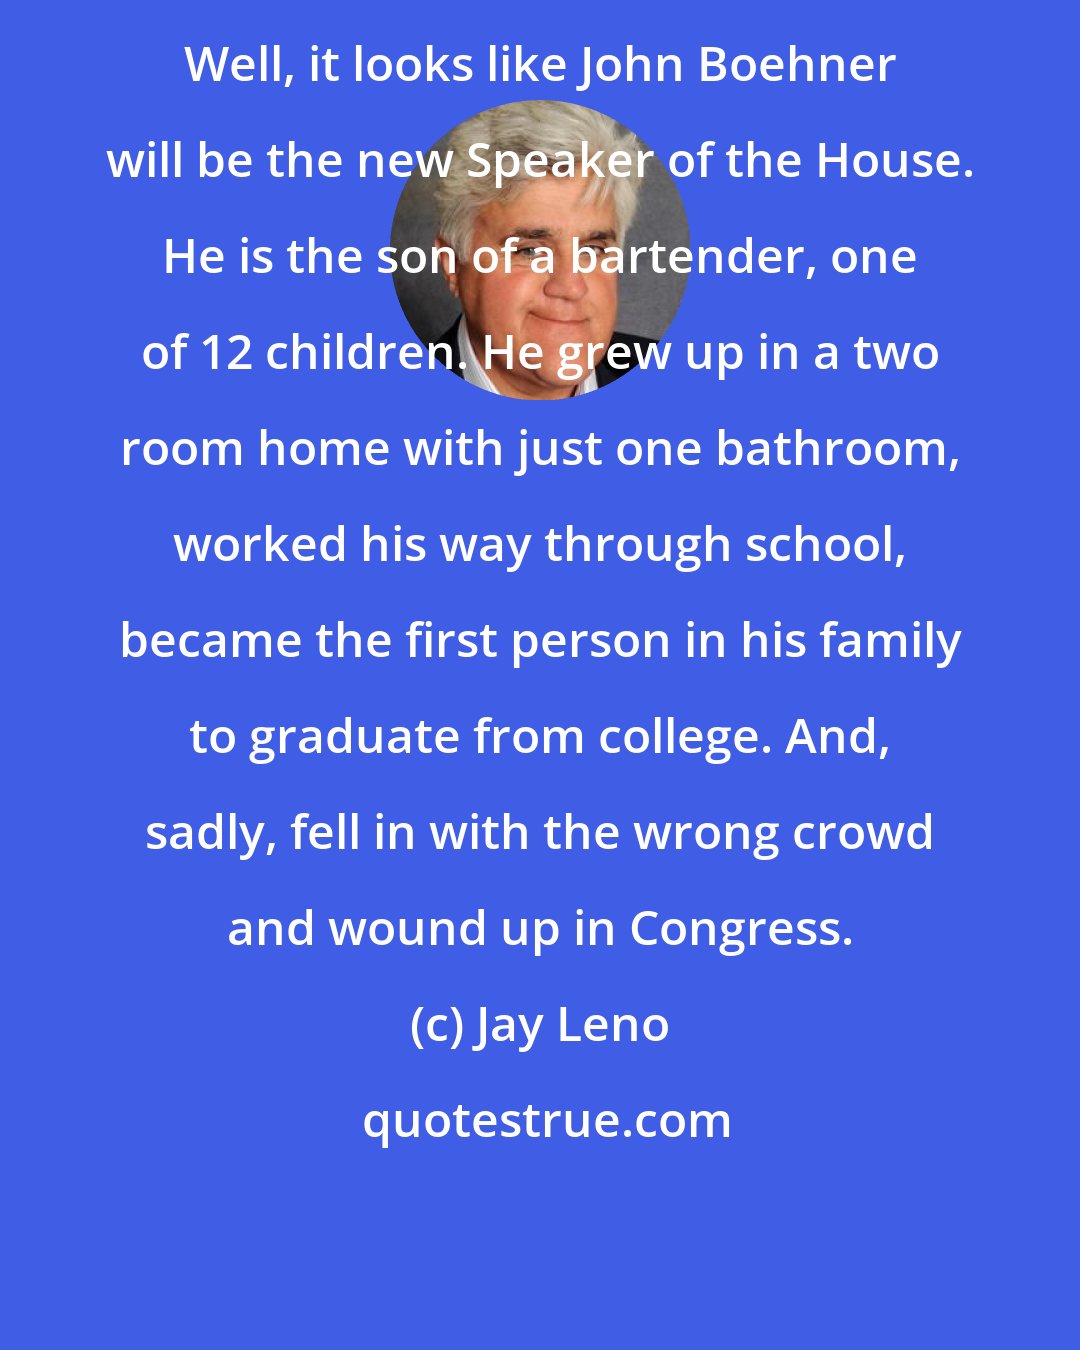 Jay Leno: Well, it looks like John Boehner will be the new Speaker of the House. He is the son of a bartender, one of 12 children. He grew up in a two room home with just one bathroom, worked his way through school, became the first person in his family to graduate from college. And, sadly, fell in with the wrong crowd and wound up in Congress.